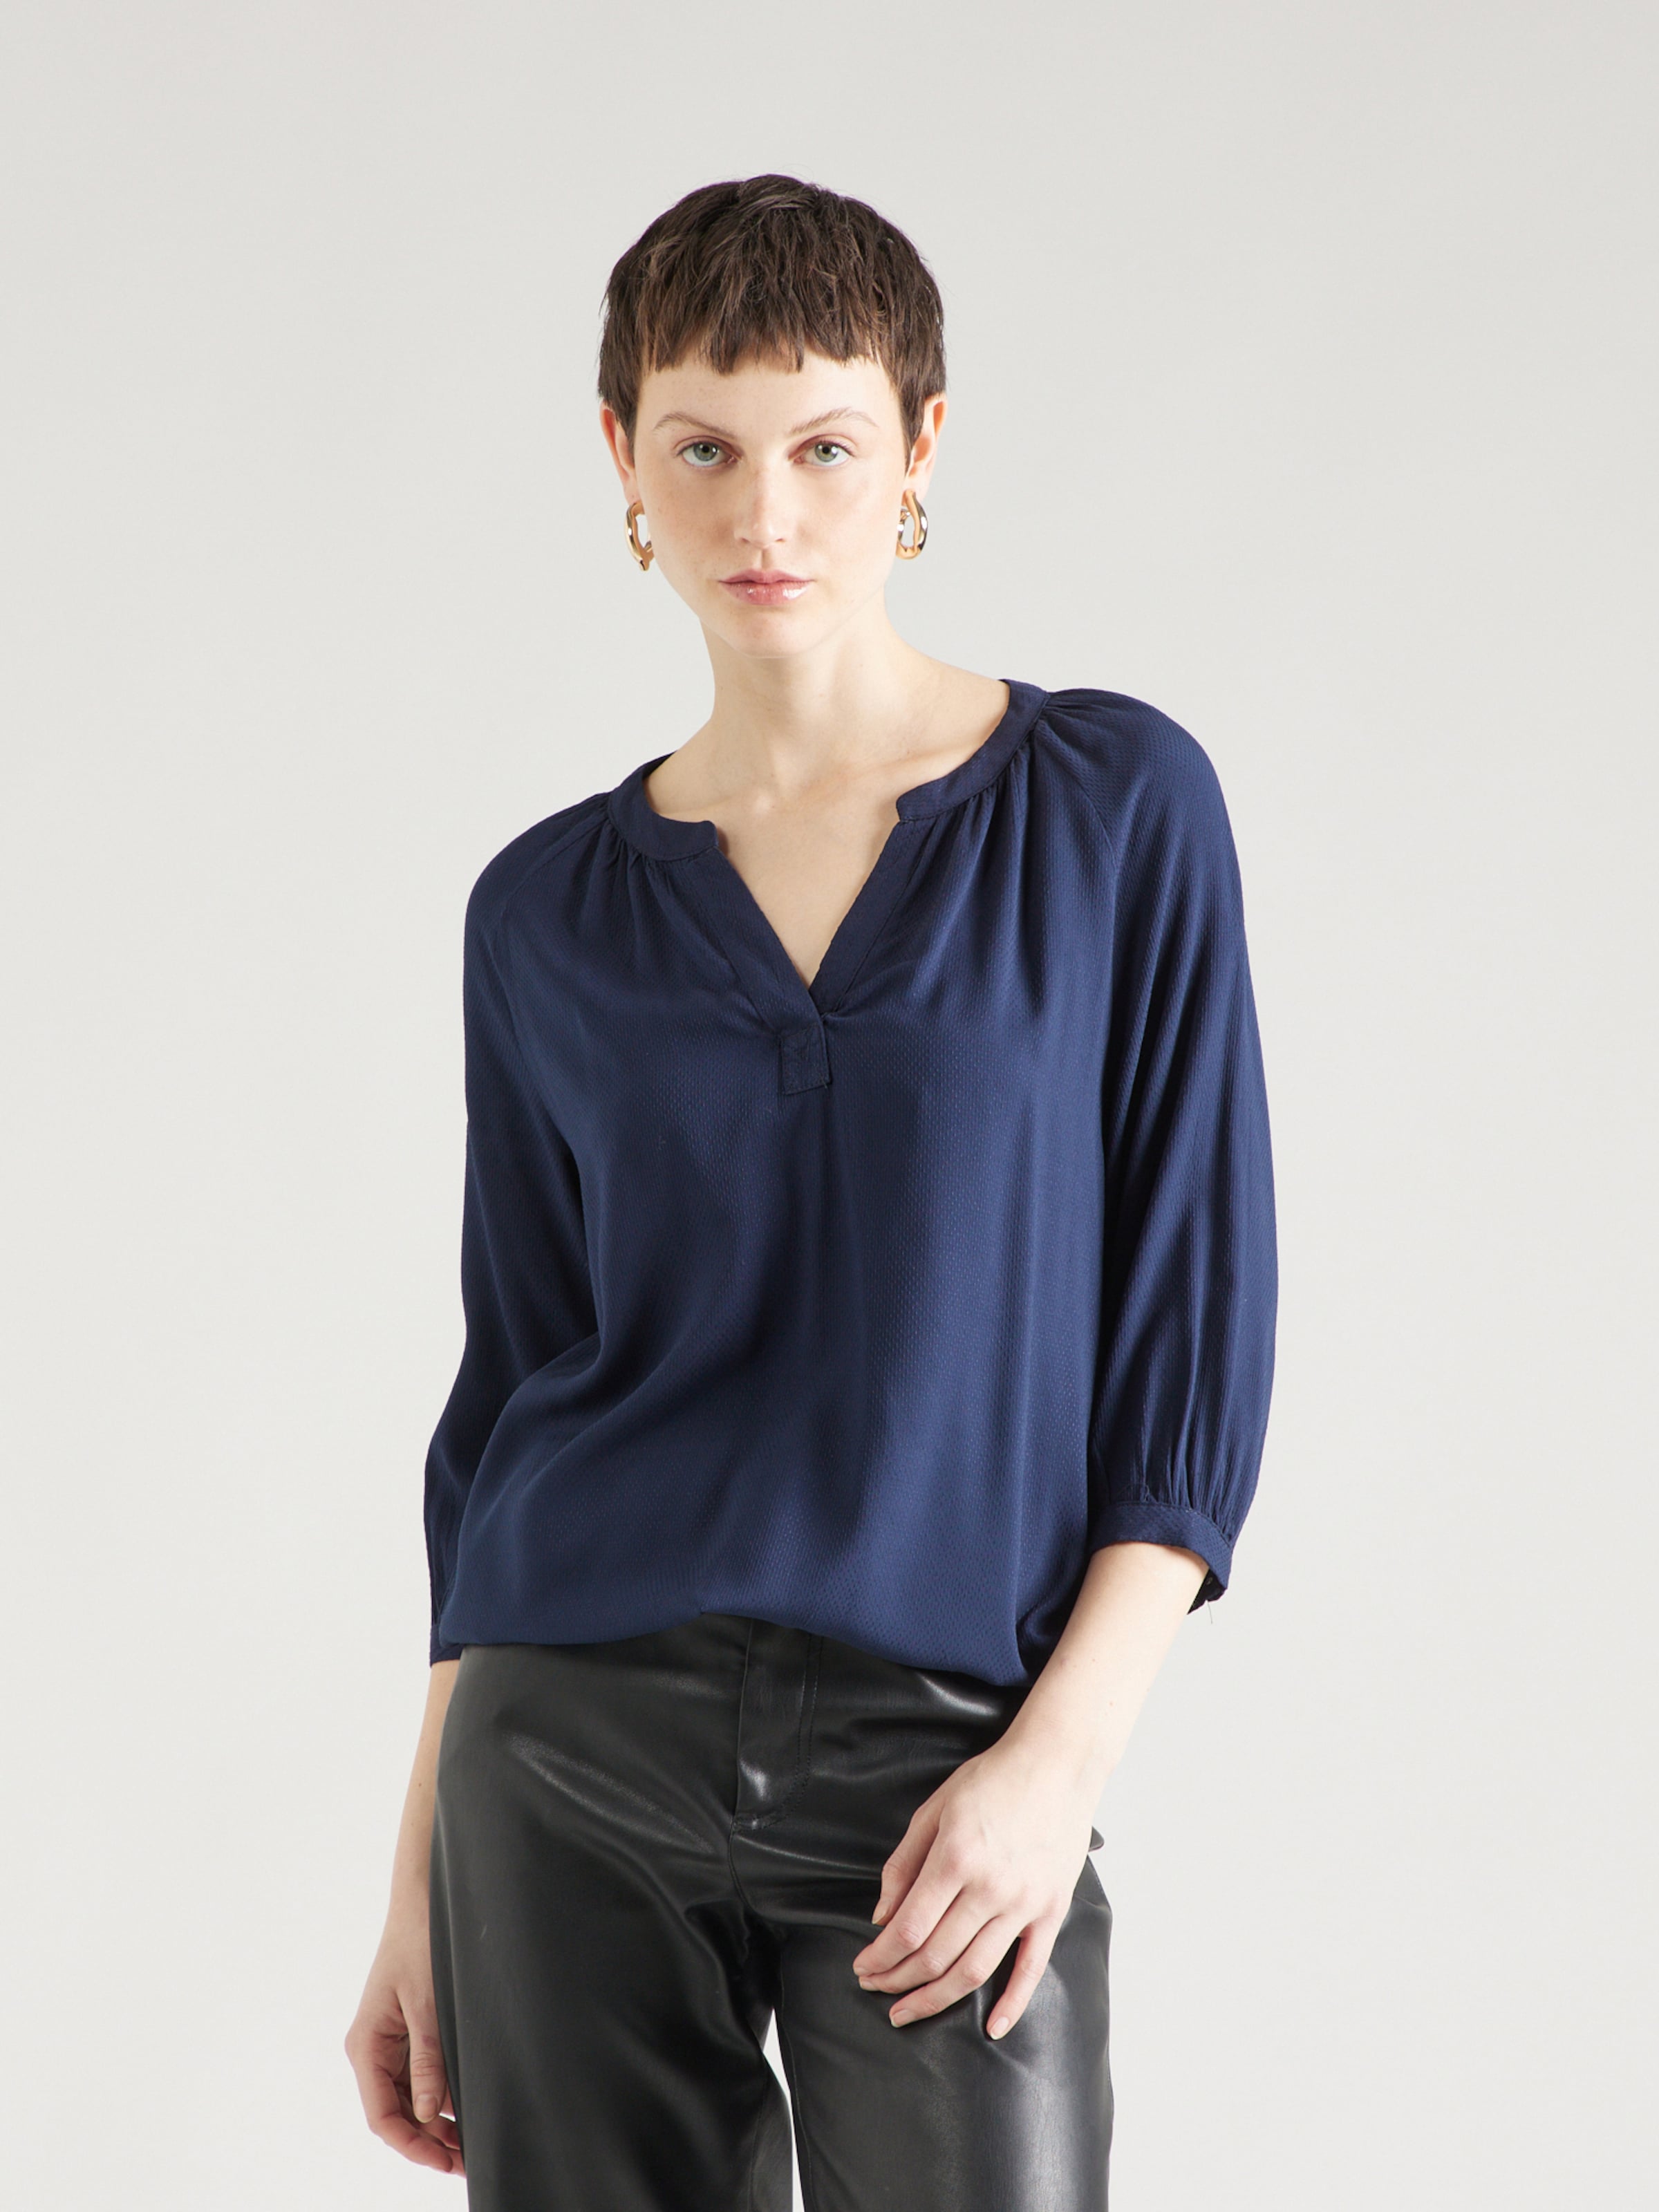 YOU \'Co44rnelia\' Navy ABOUT in Blouse ZABAIONE |